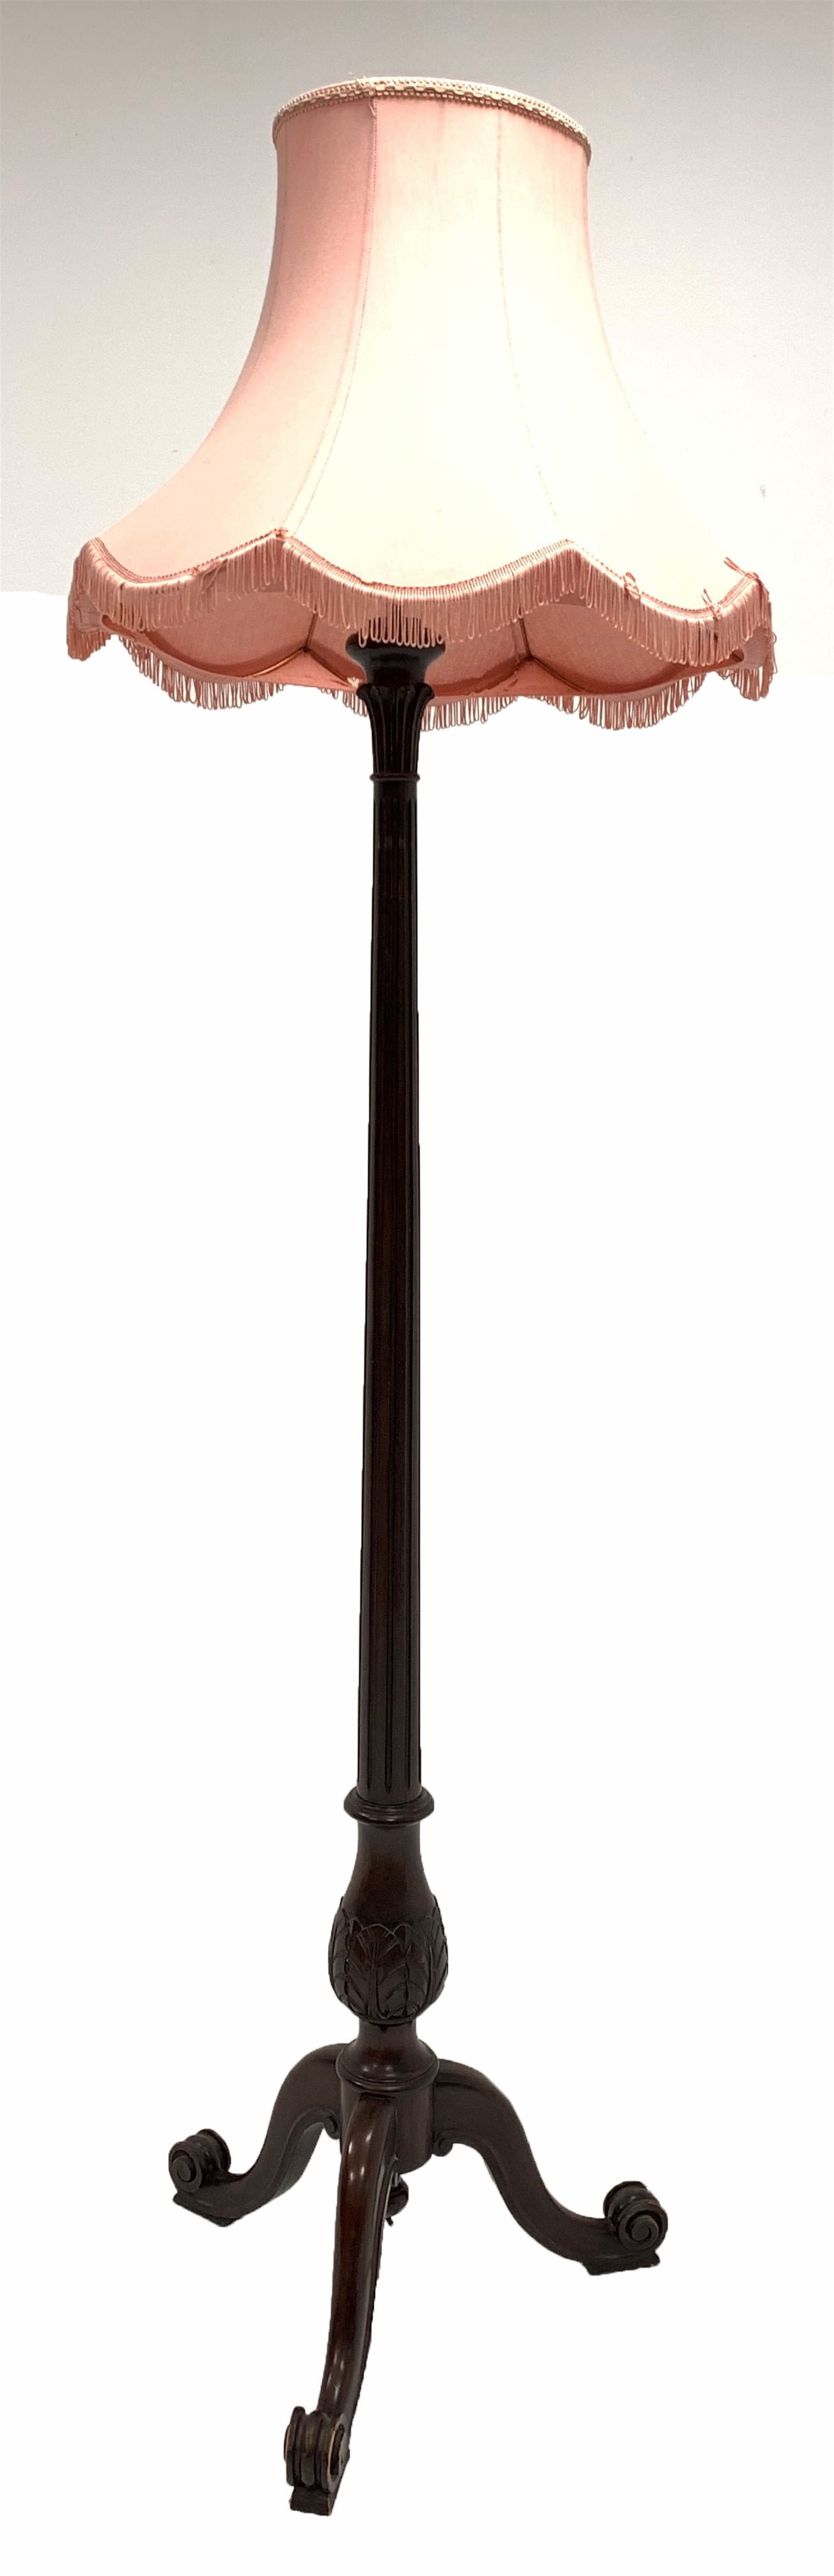 Quality mahogany 1920's standard lamp, with leaf carved and fluted column raised on triple spay sup